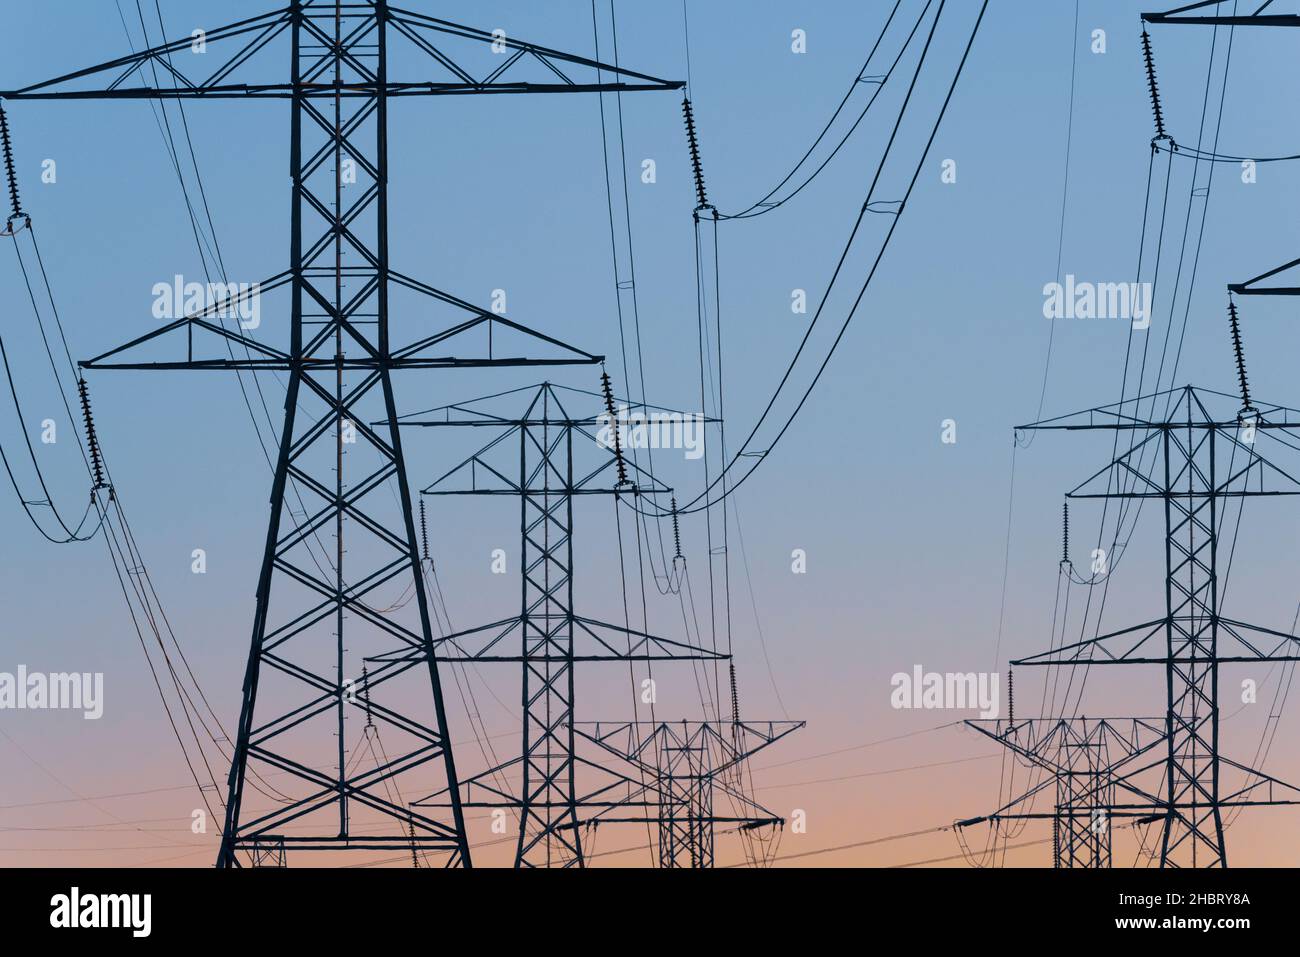 Overhead Electrical Pylons - transmission lines in Southeast Michigan USA operated by ITC Holdings Corp. provide Midwest grid capacity Stock Photo